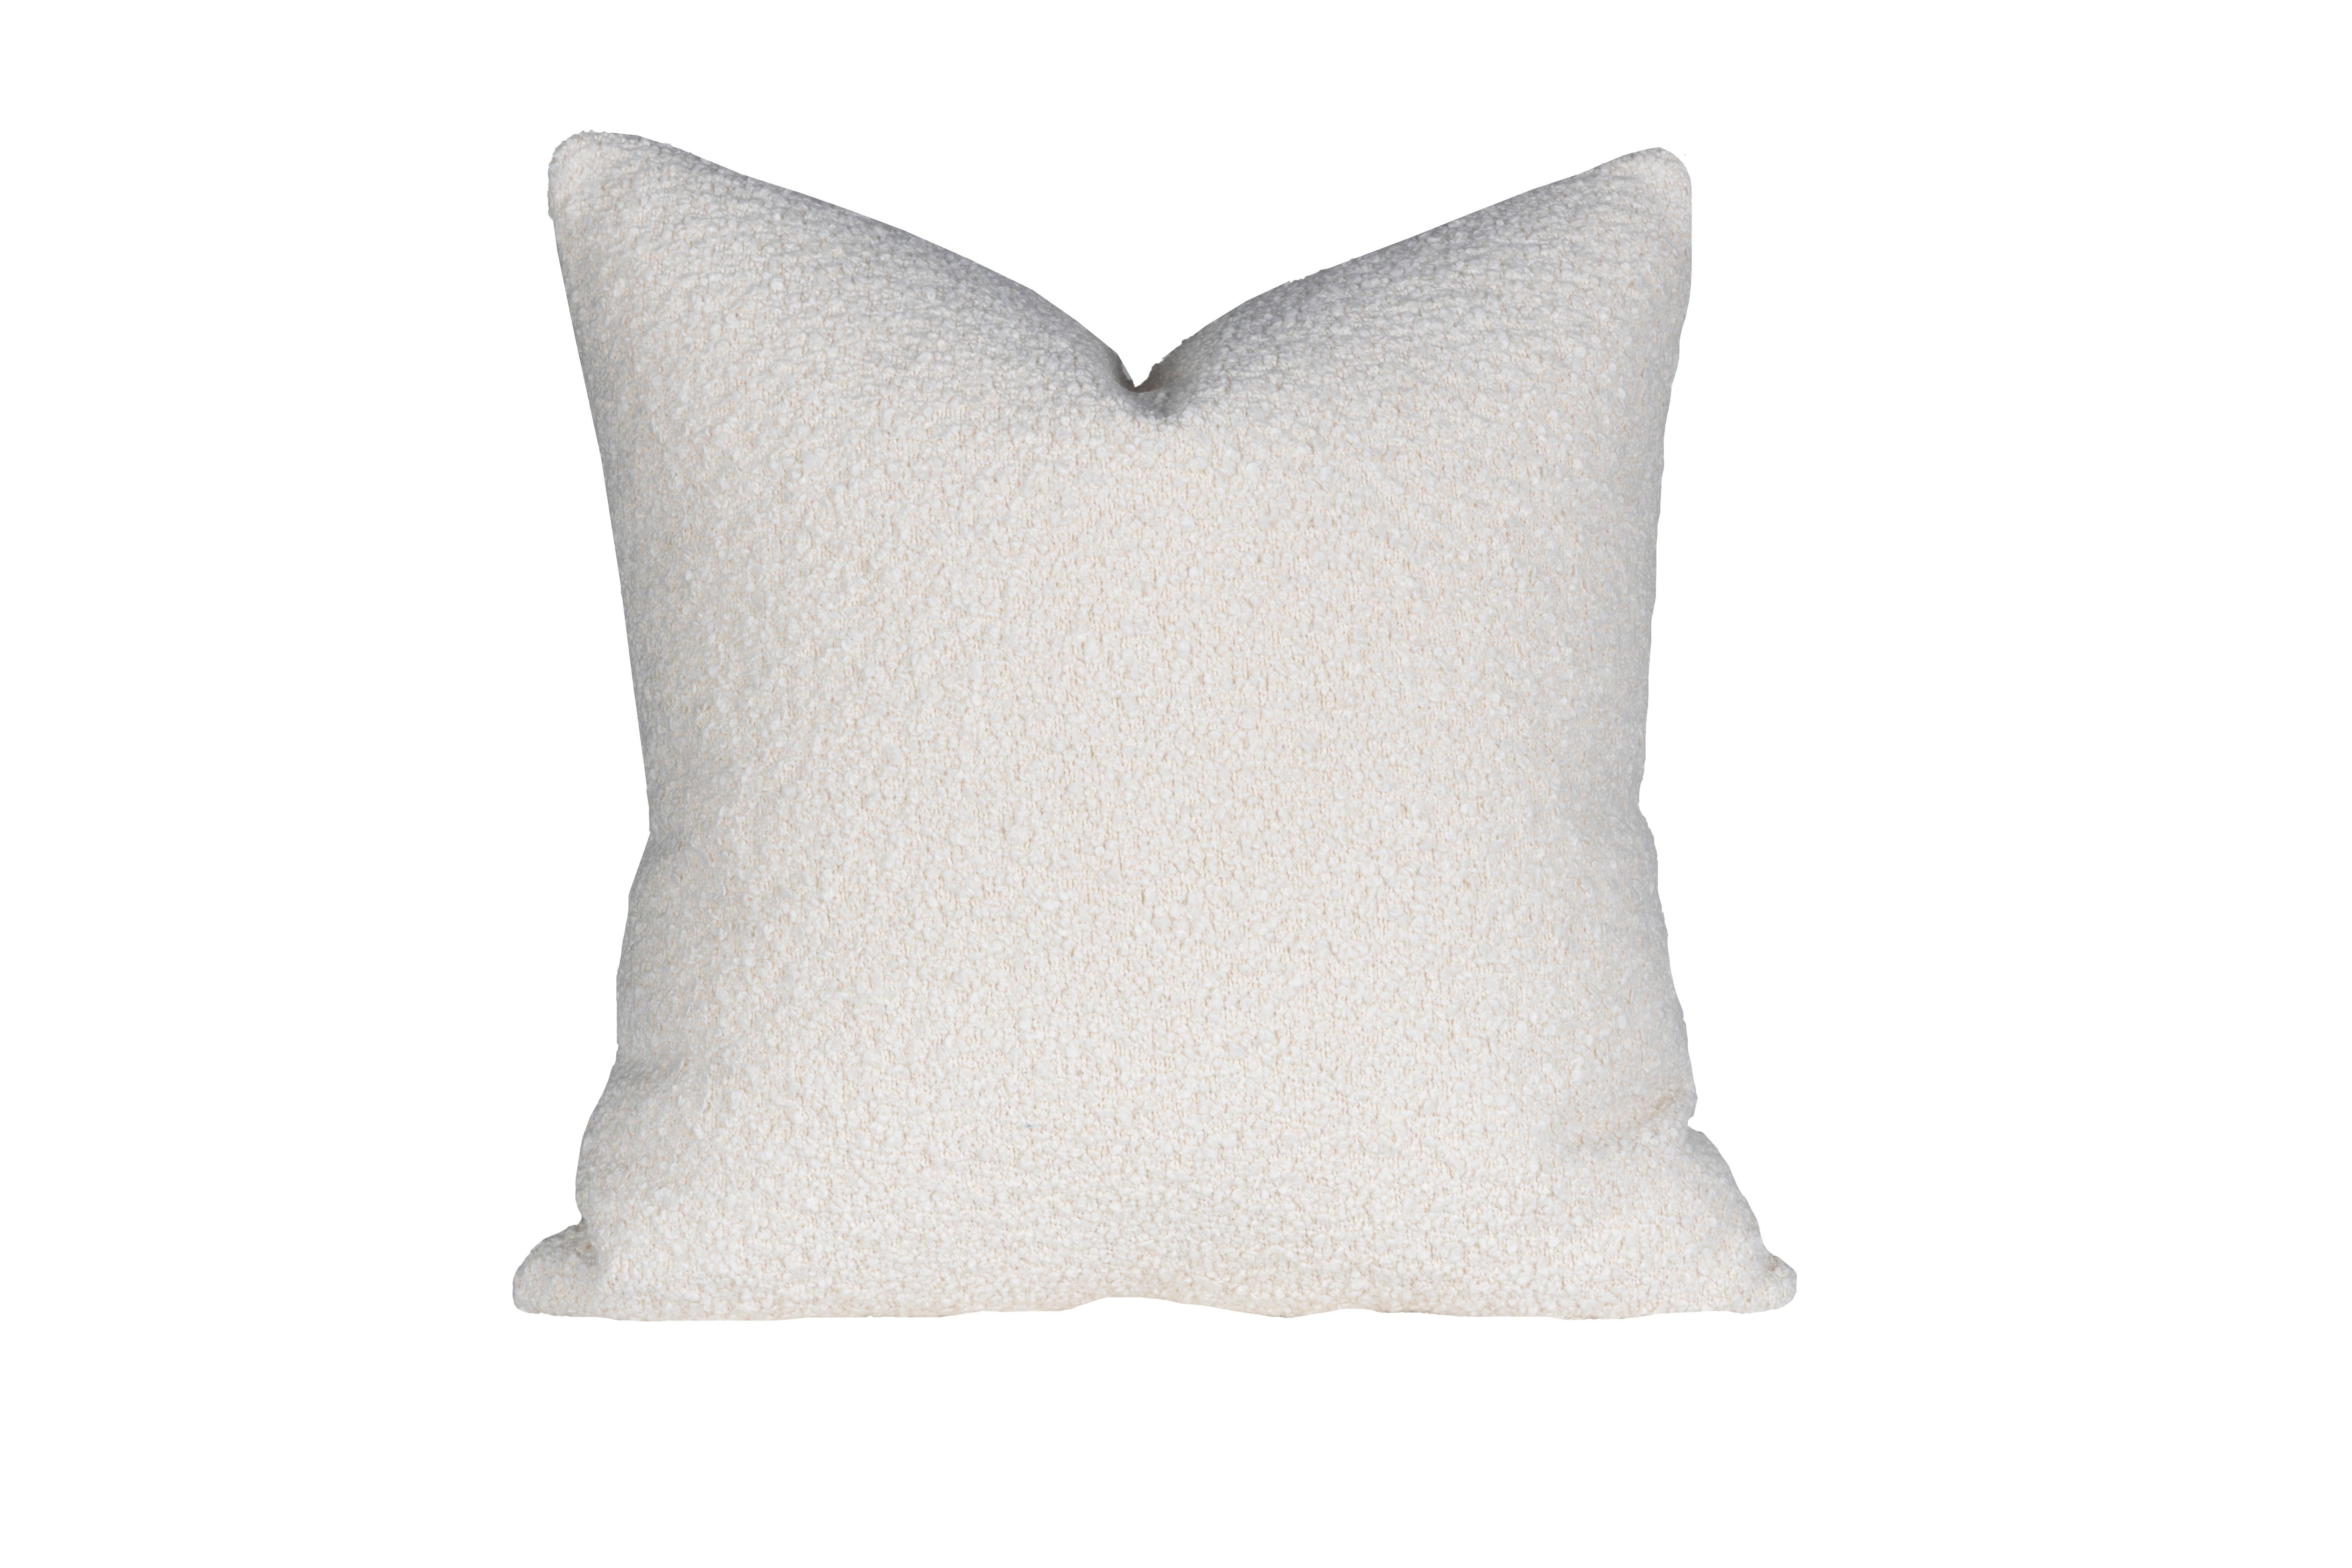 Introducing the newest to our artisan pillow collection. Made from vintage boucle, each one is unique and luxurious. The 22